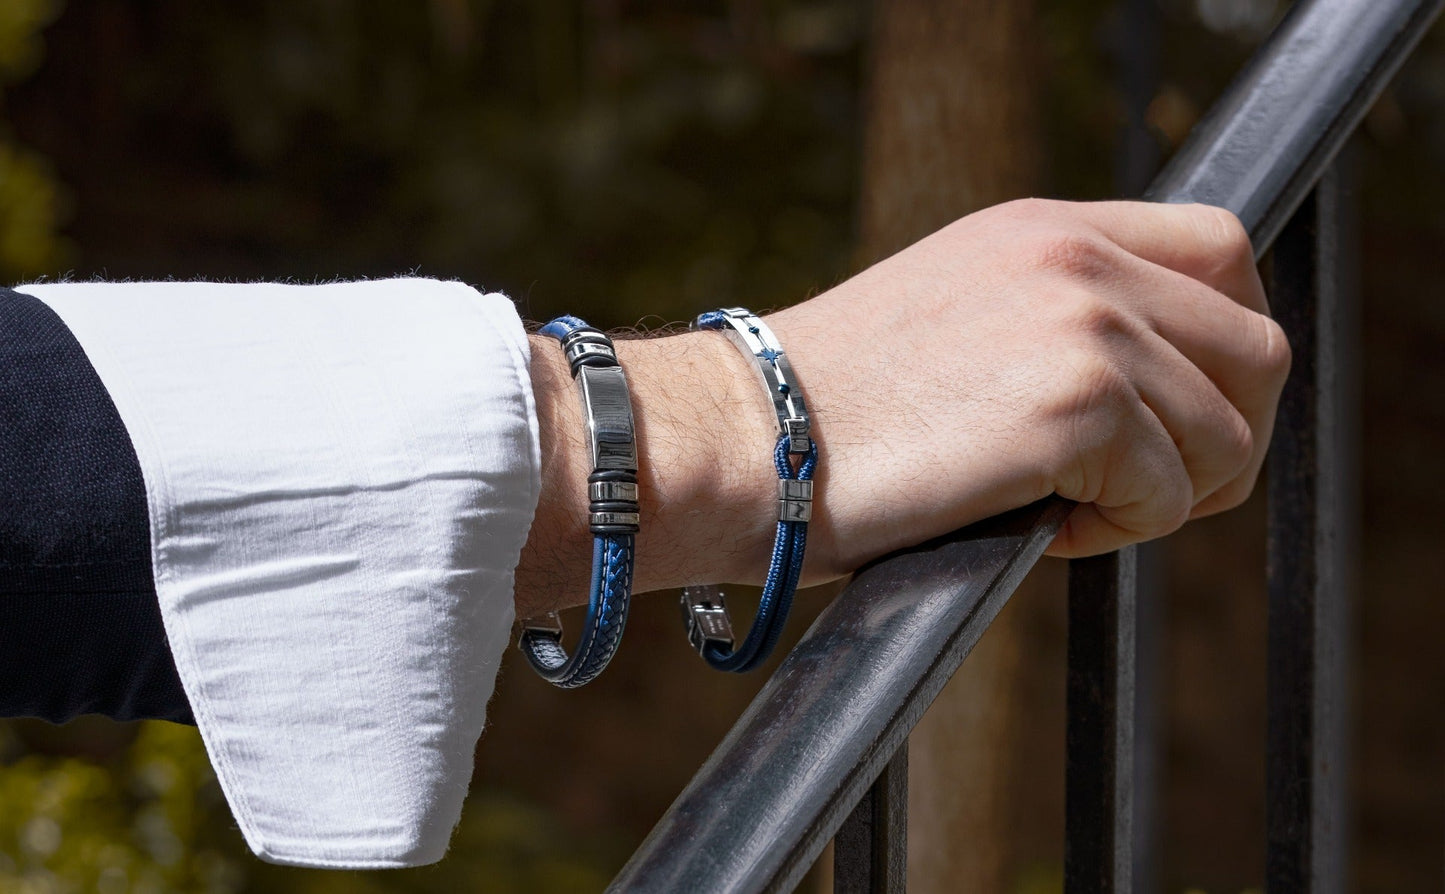 New Blue White and Black ID Stainless Steel Bracelet - FJewellery